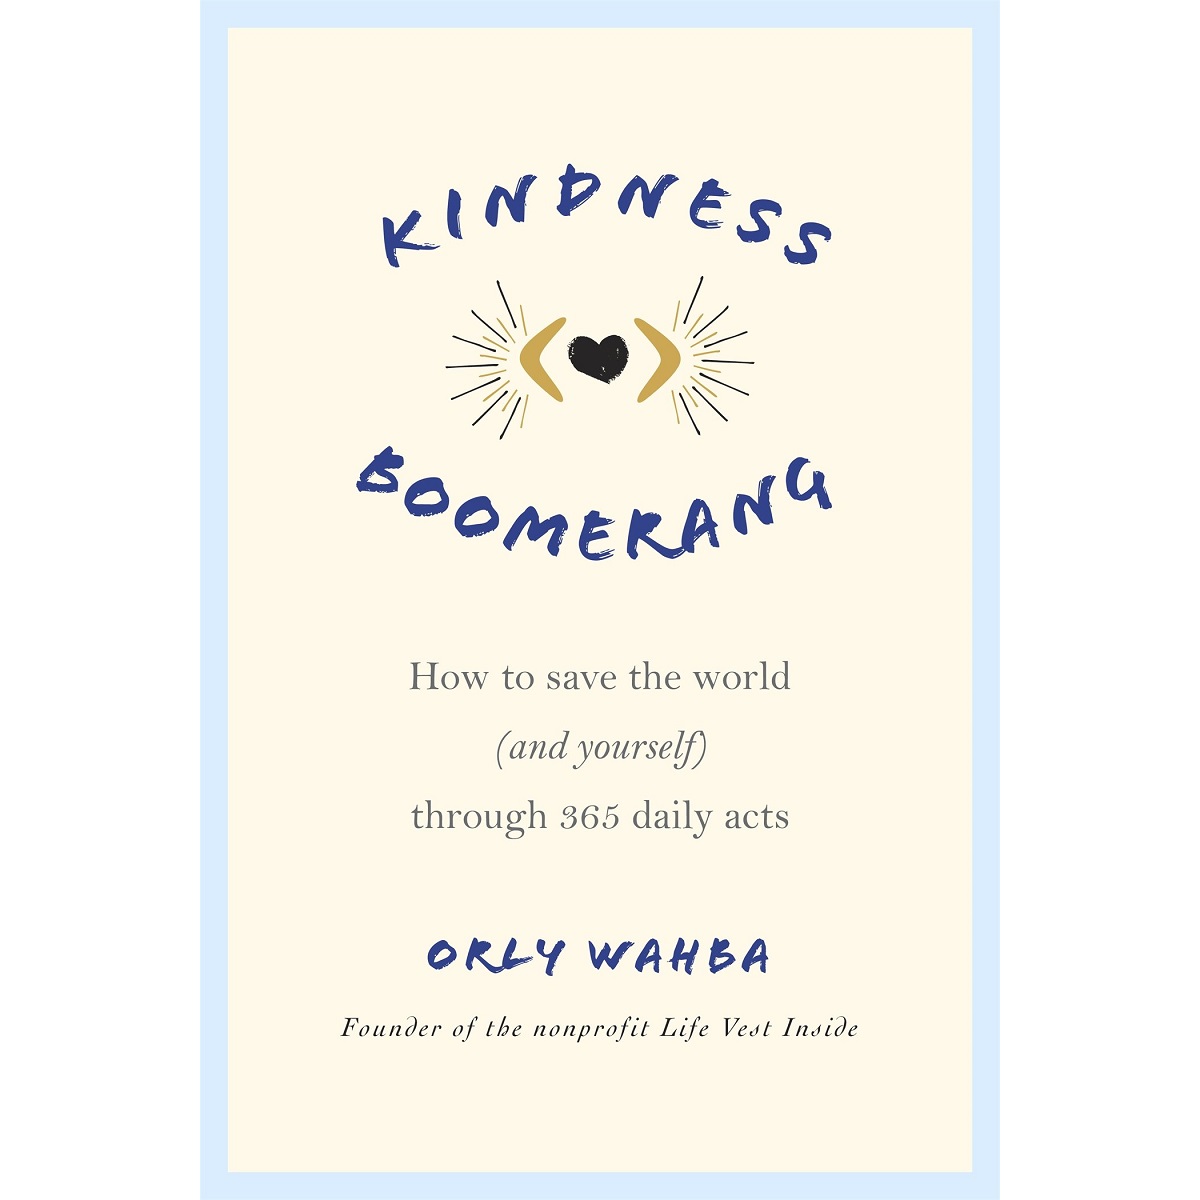 Kindness Boomerang by Orly Wahba